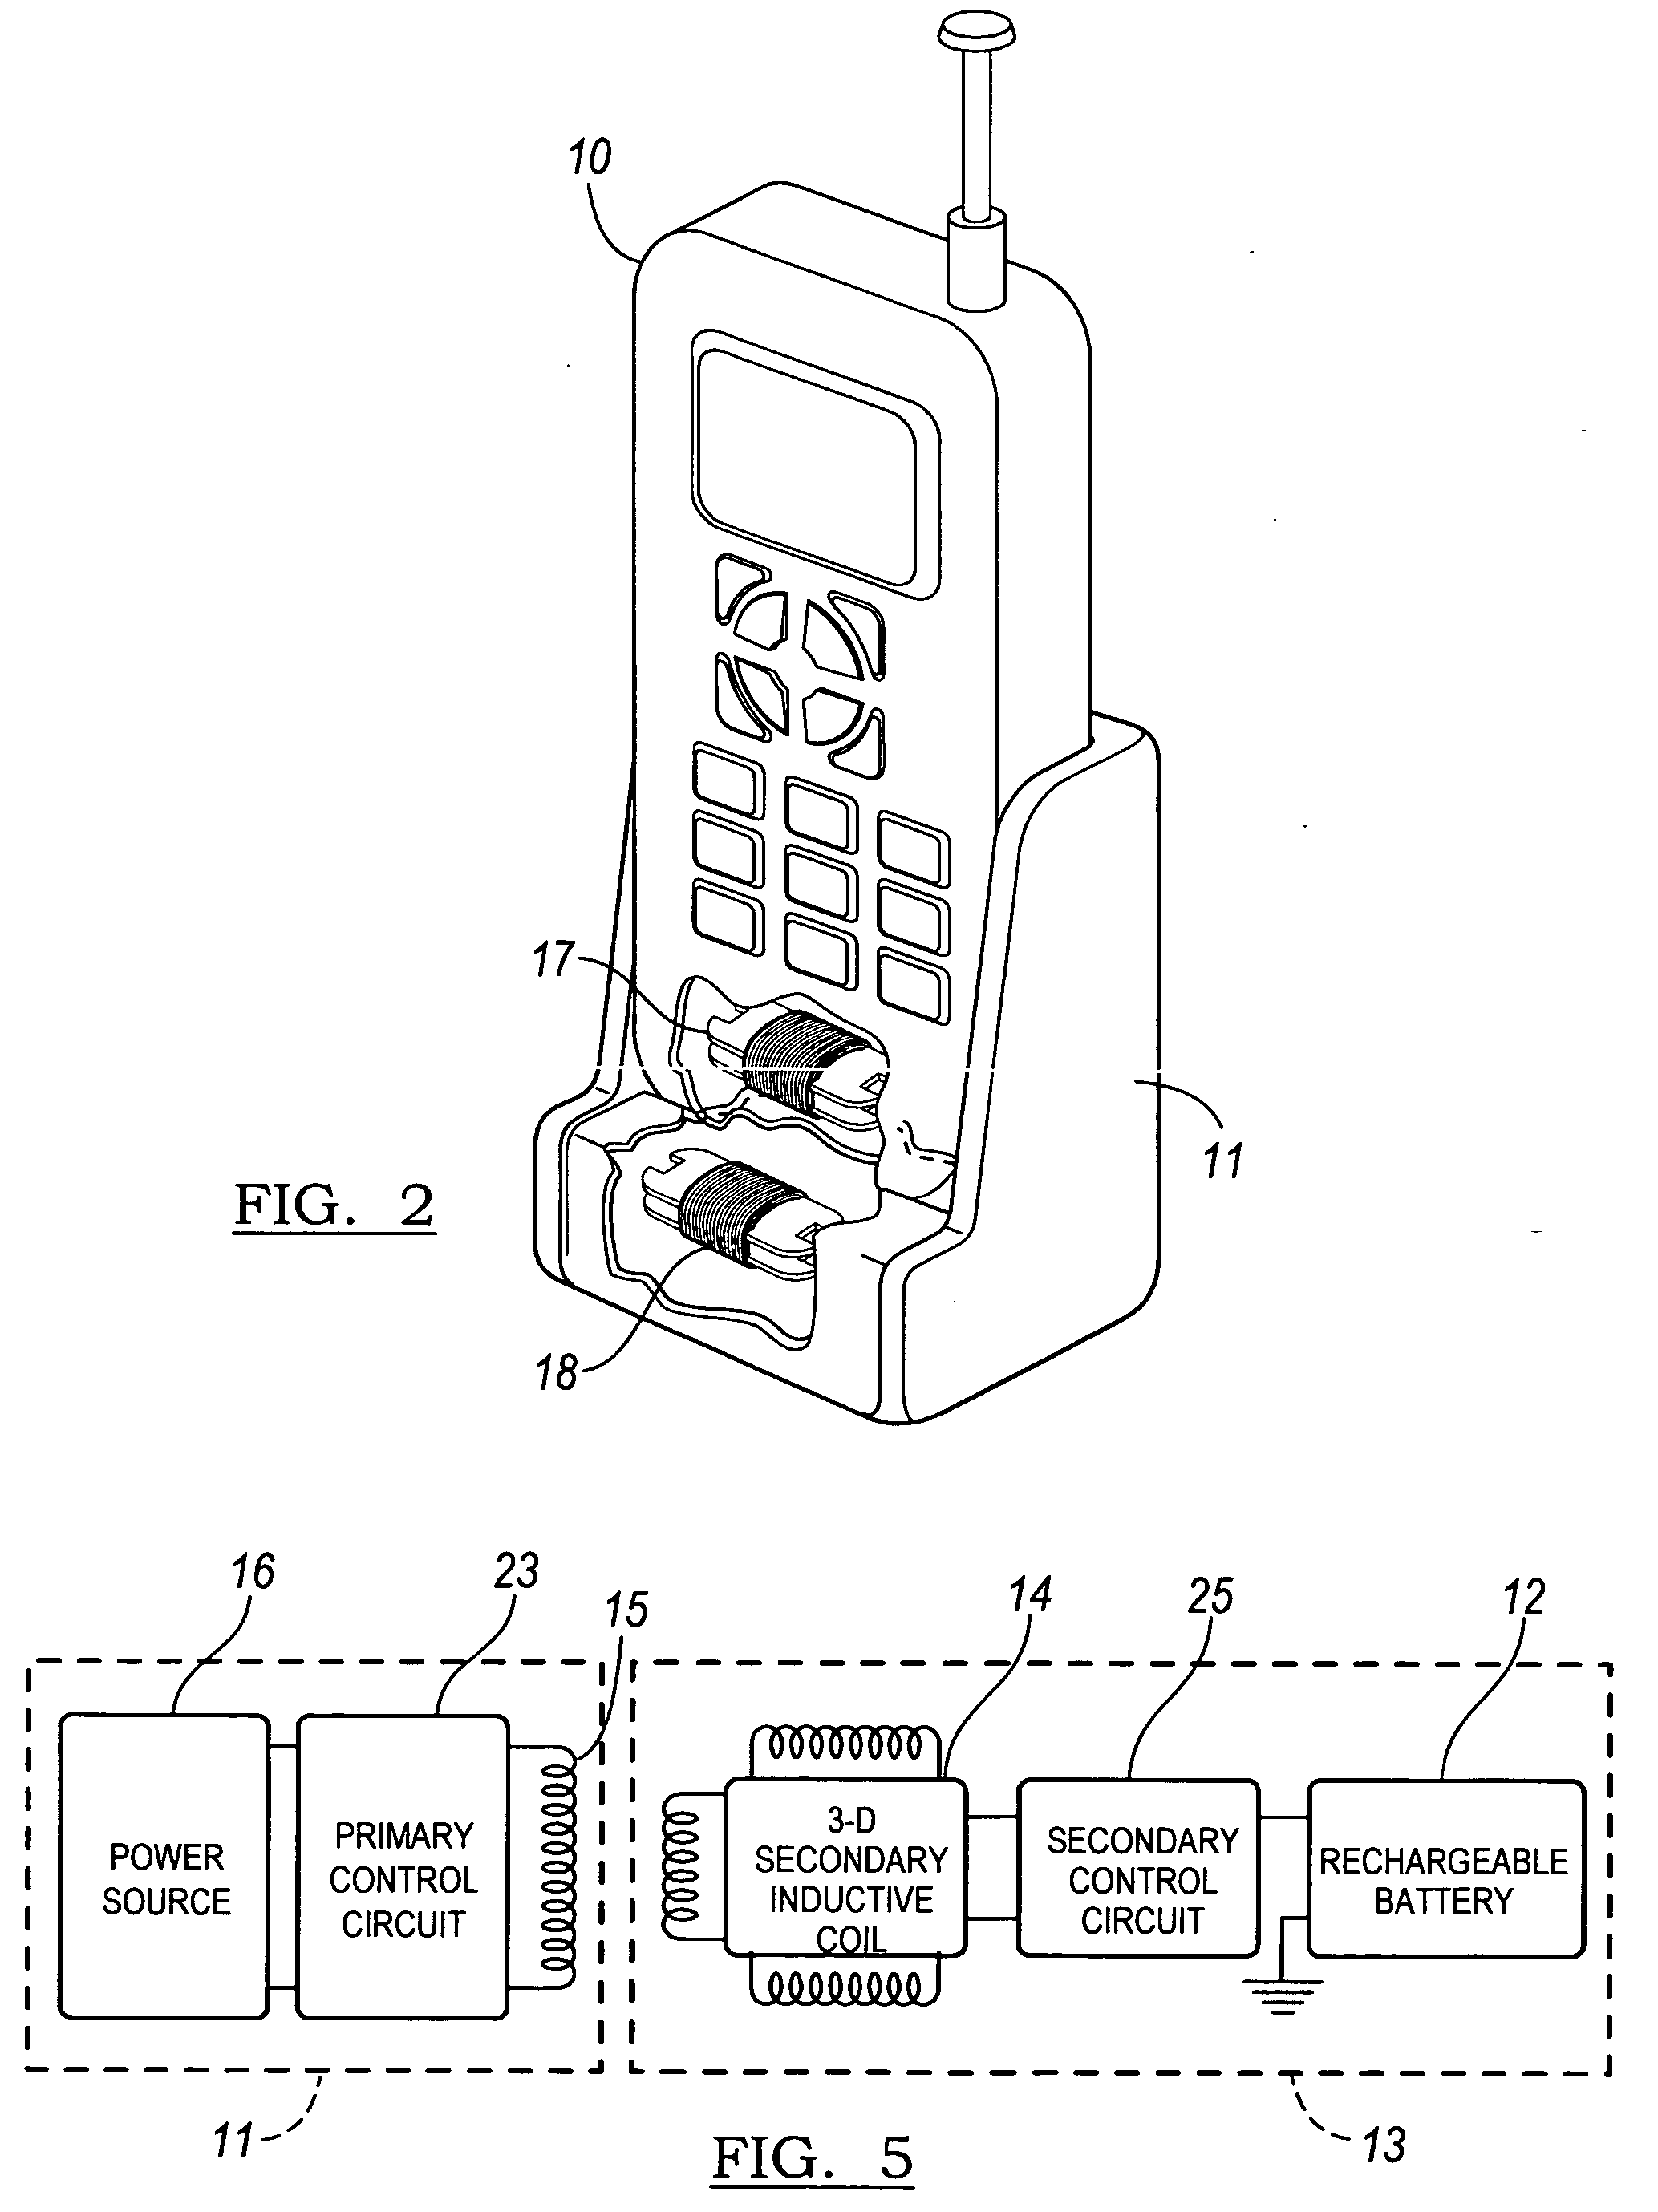 Apparatus for inductively recharging batteries